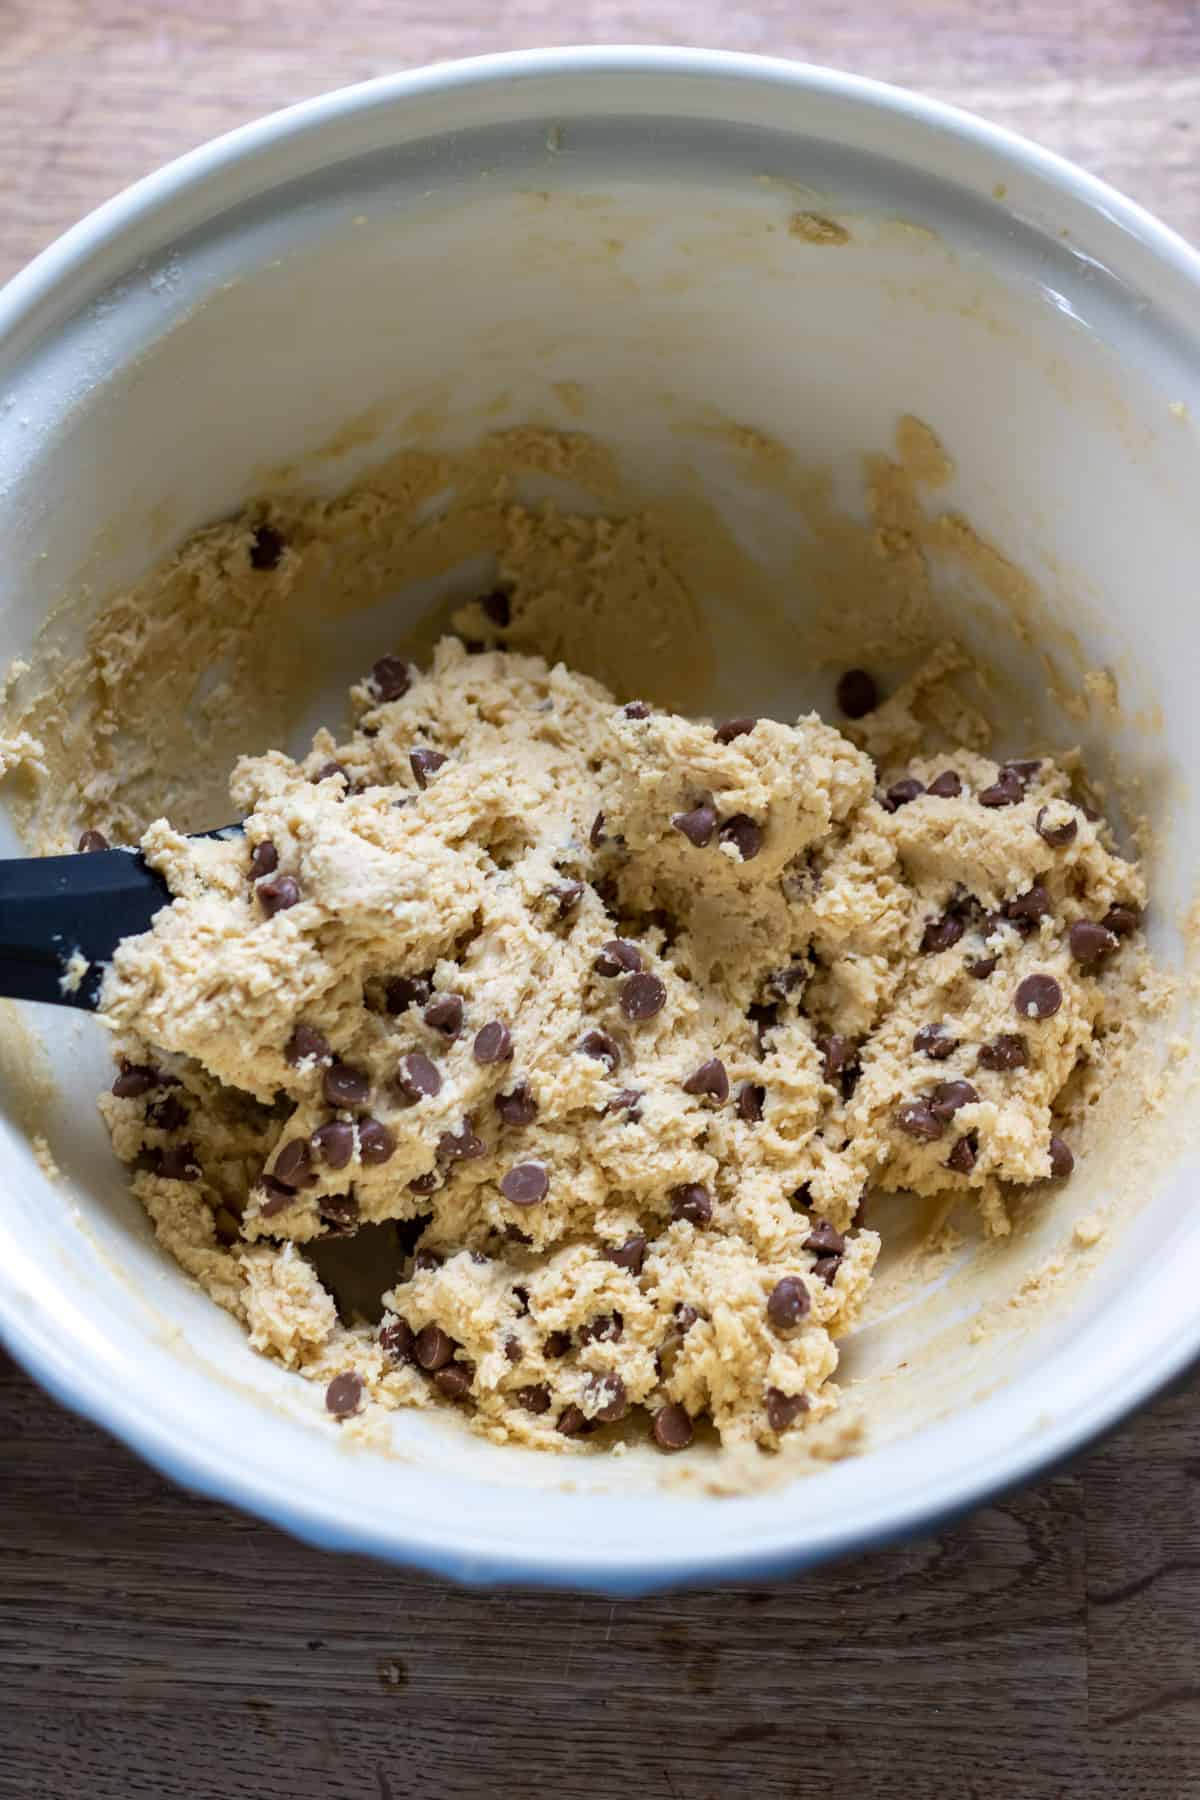 Folding chocolate chips into the cookie dough.